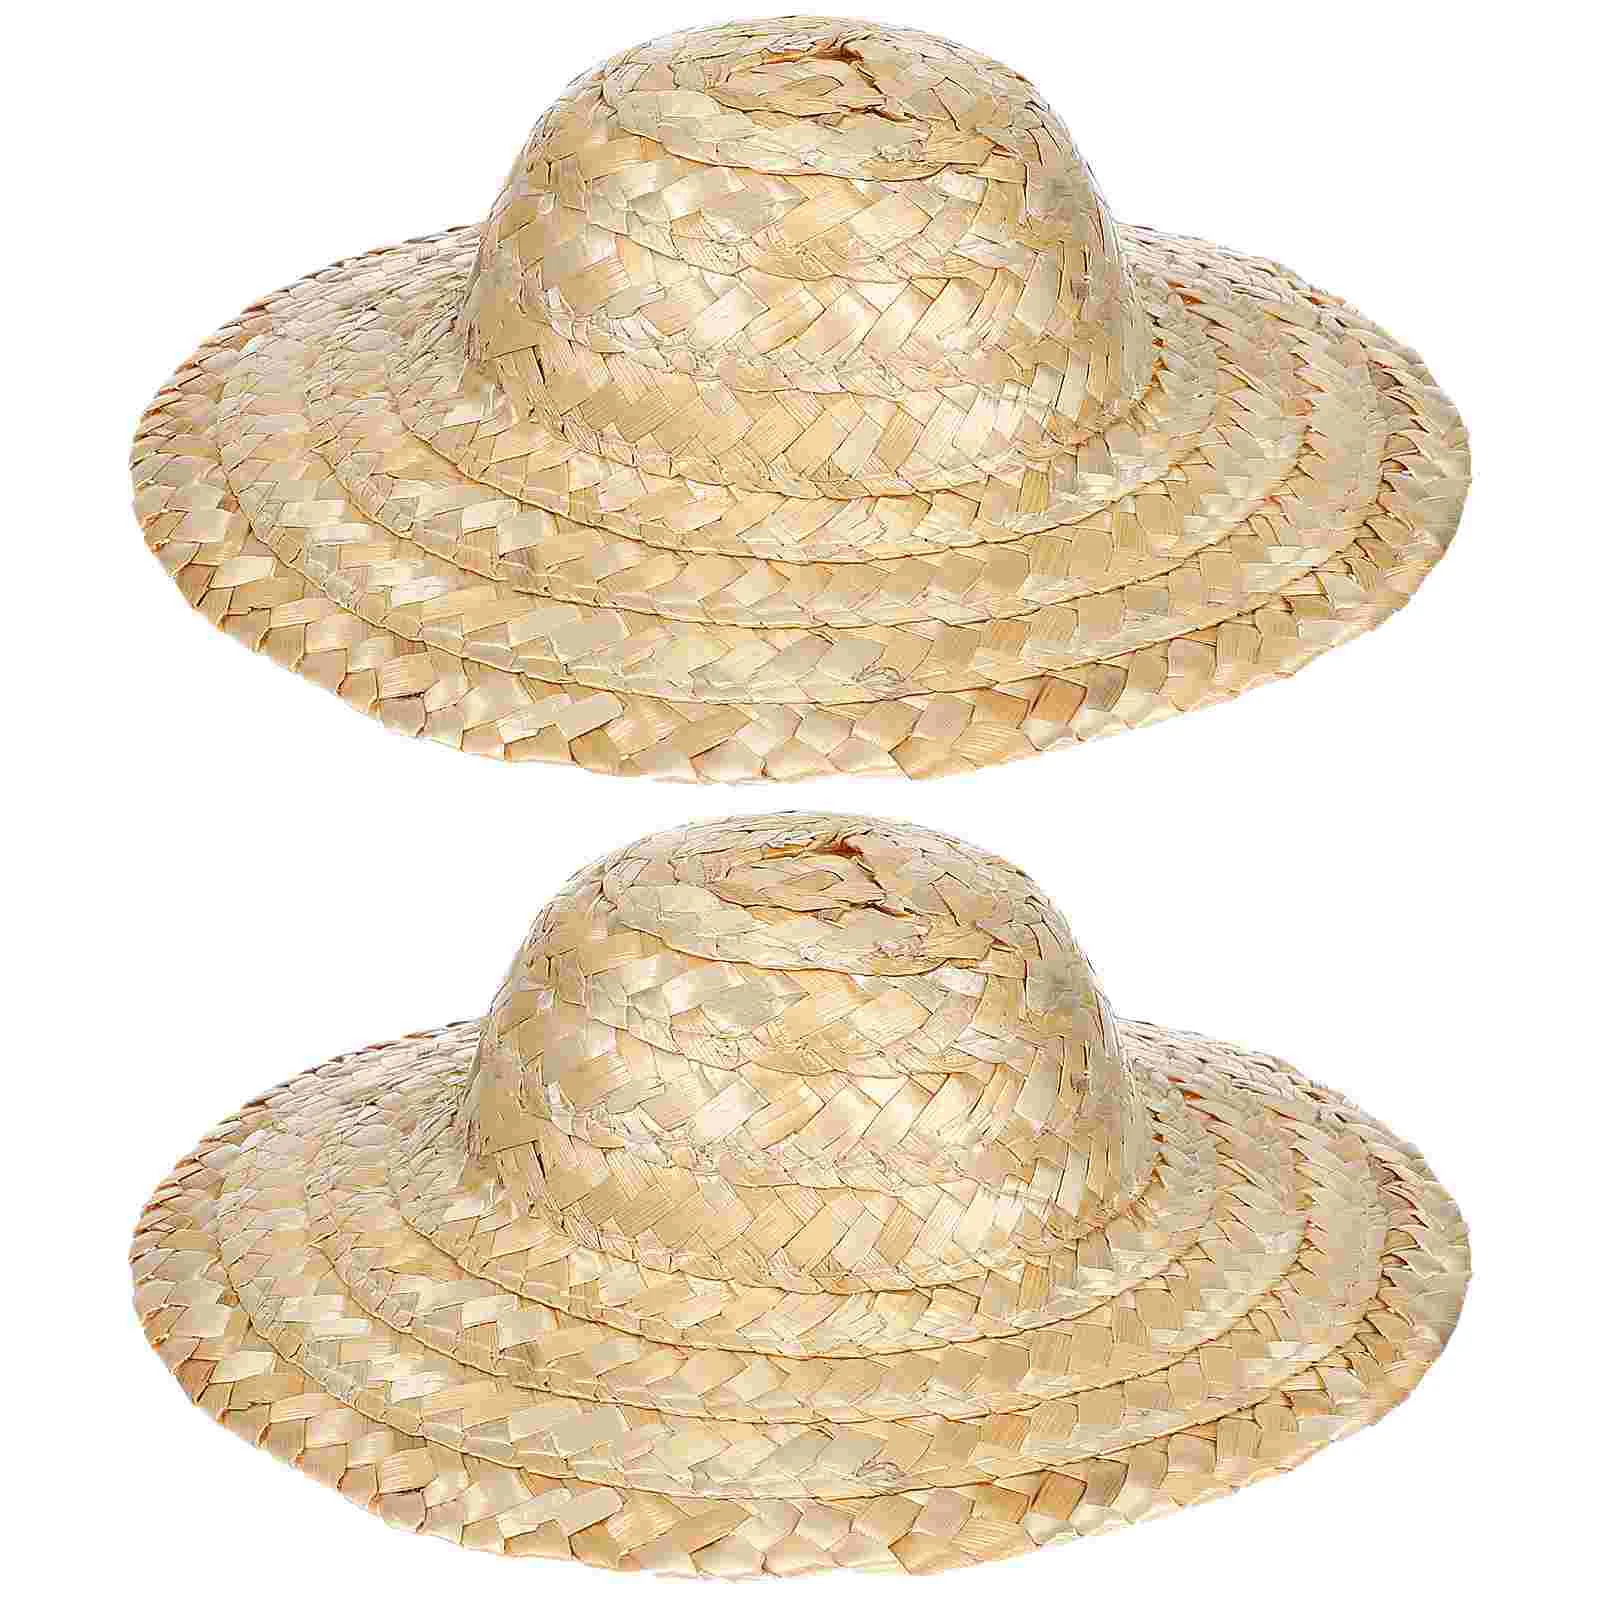 

Braided Straw Hat Caps Mini Hats Decor Hand-woven Clothes Ornament Adornment Flower Centerpieces